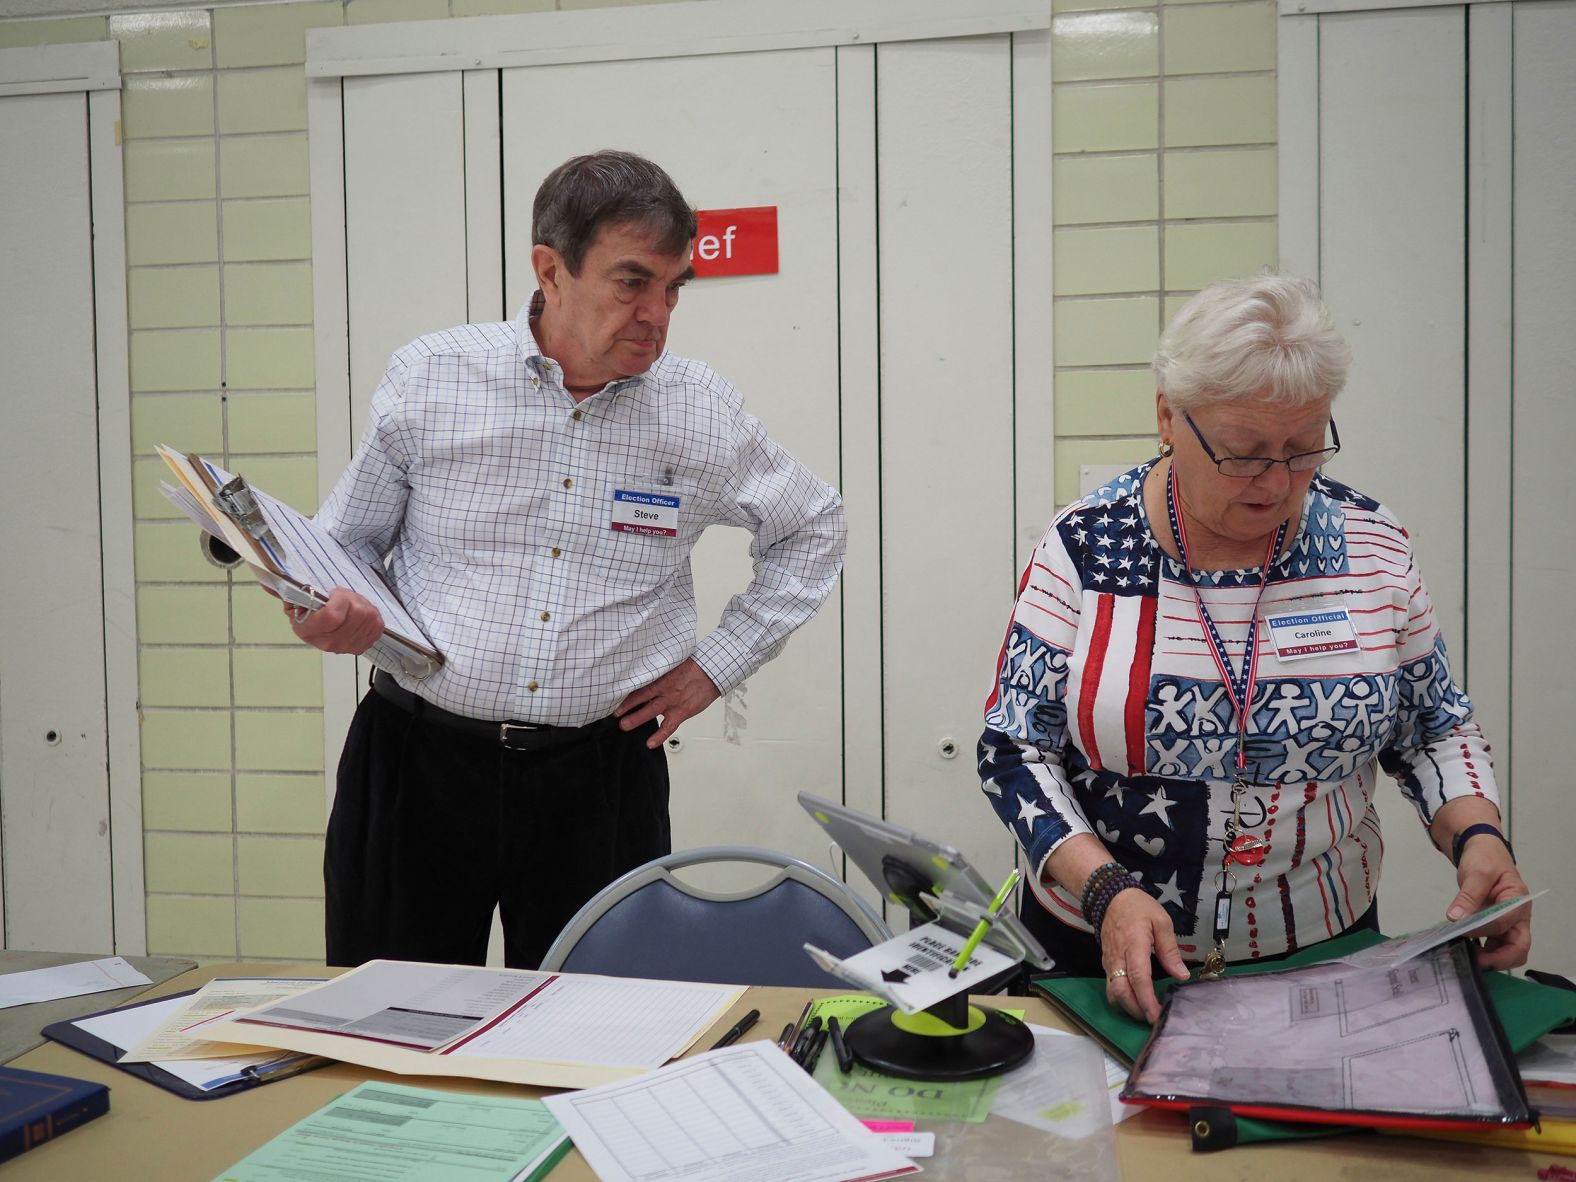 Election officials in Arlington, Virginia, prepare to open the polls on Tuesday.